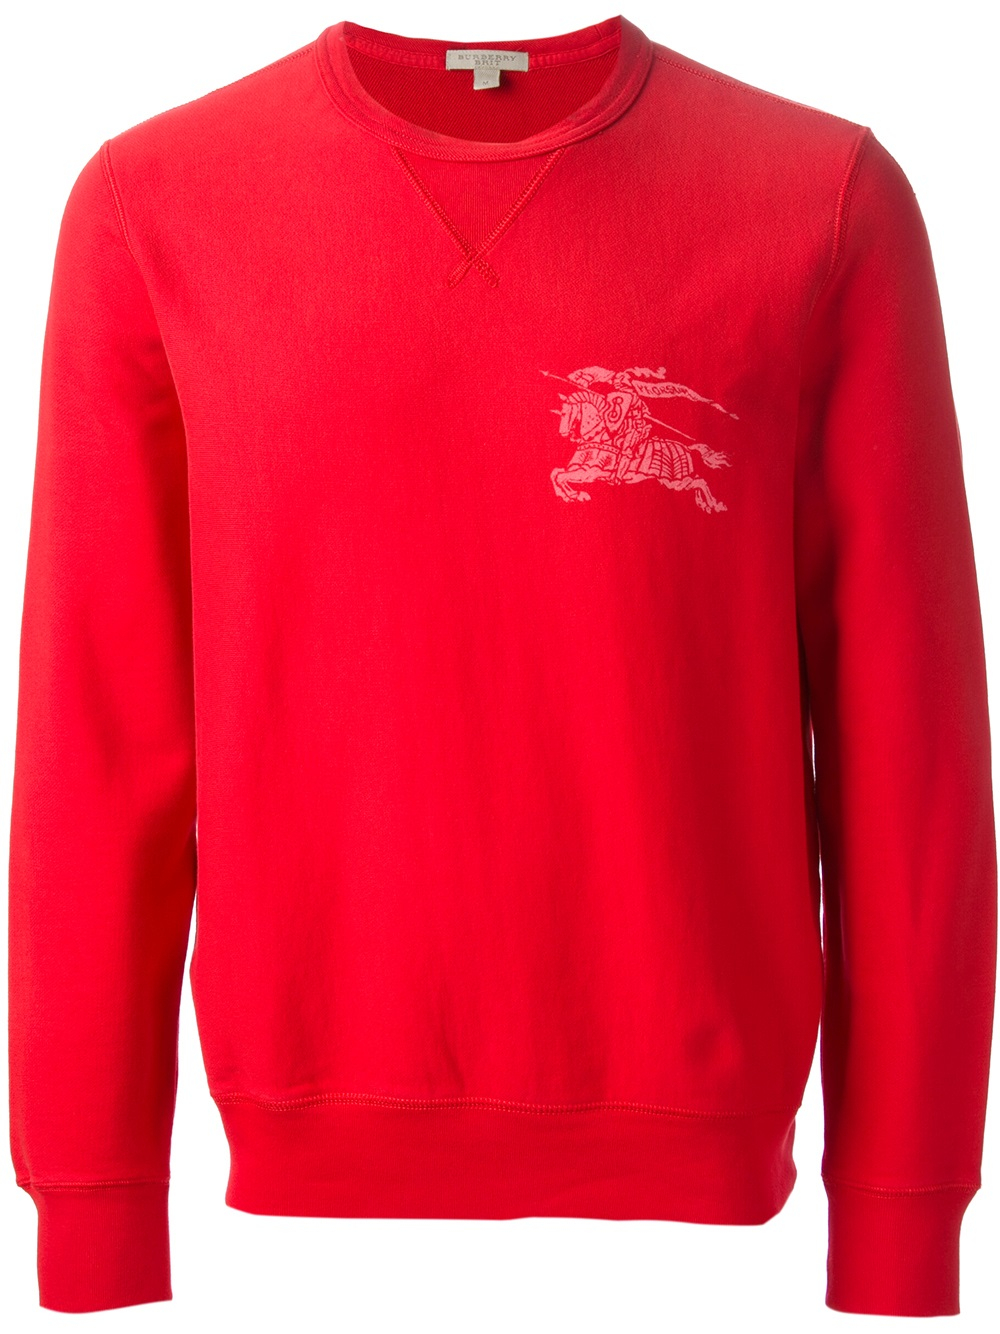 red burberry sweater